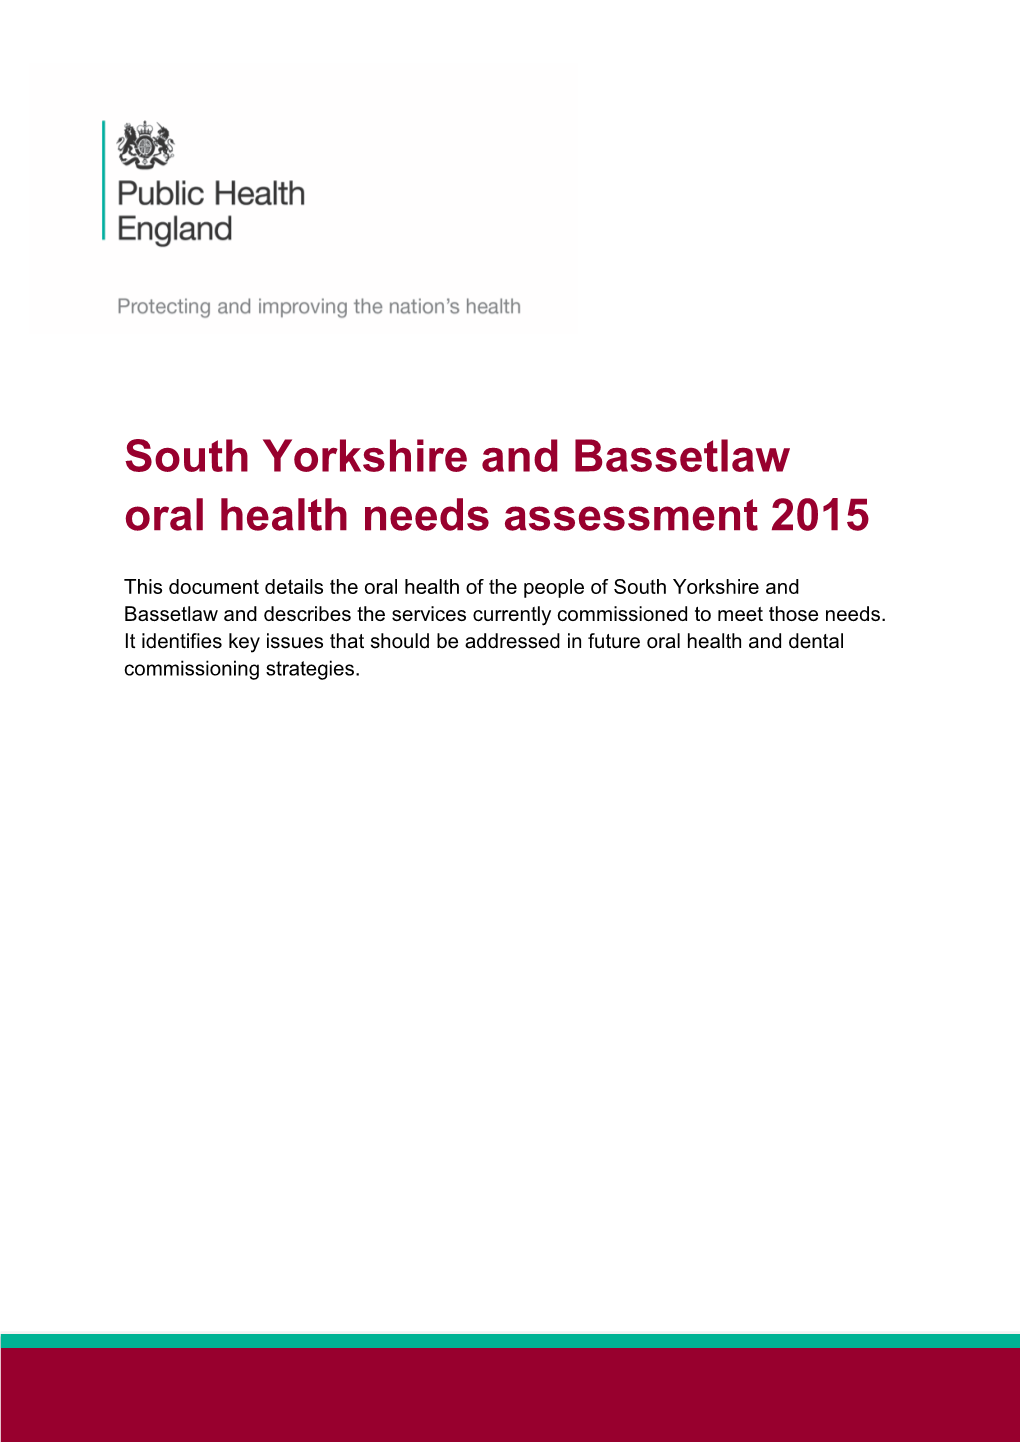 South Yorkshire and Bassetlaw Oral Health Needs Assessment 2015